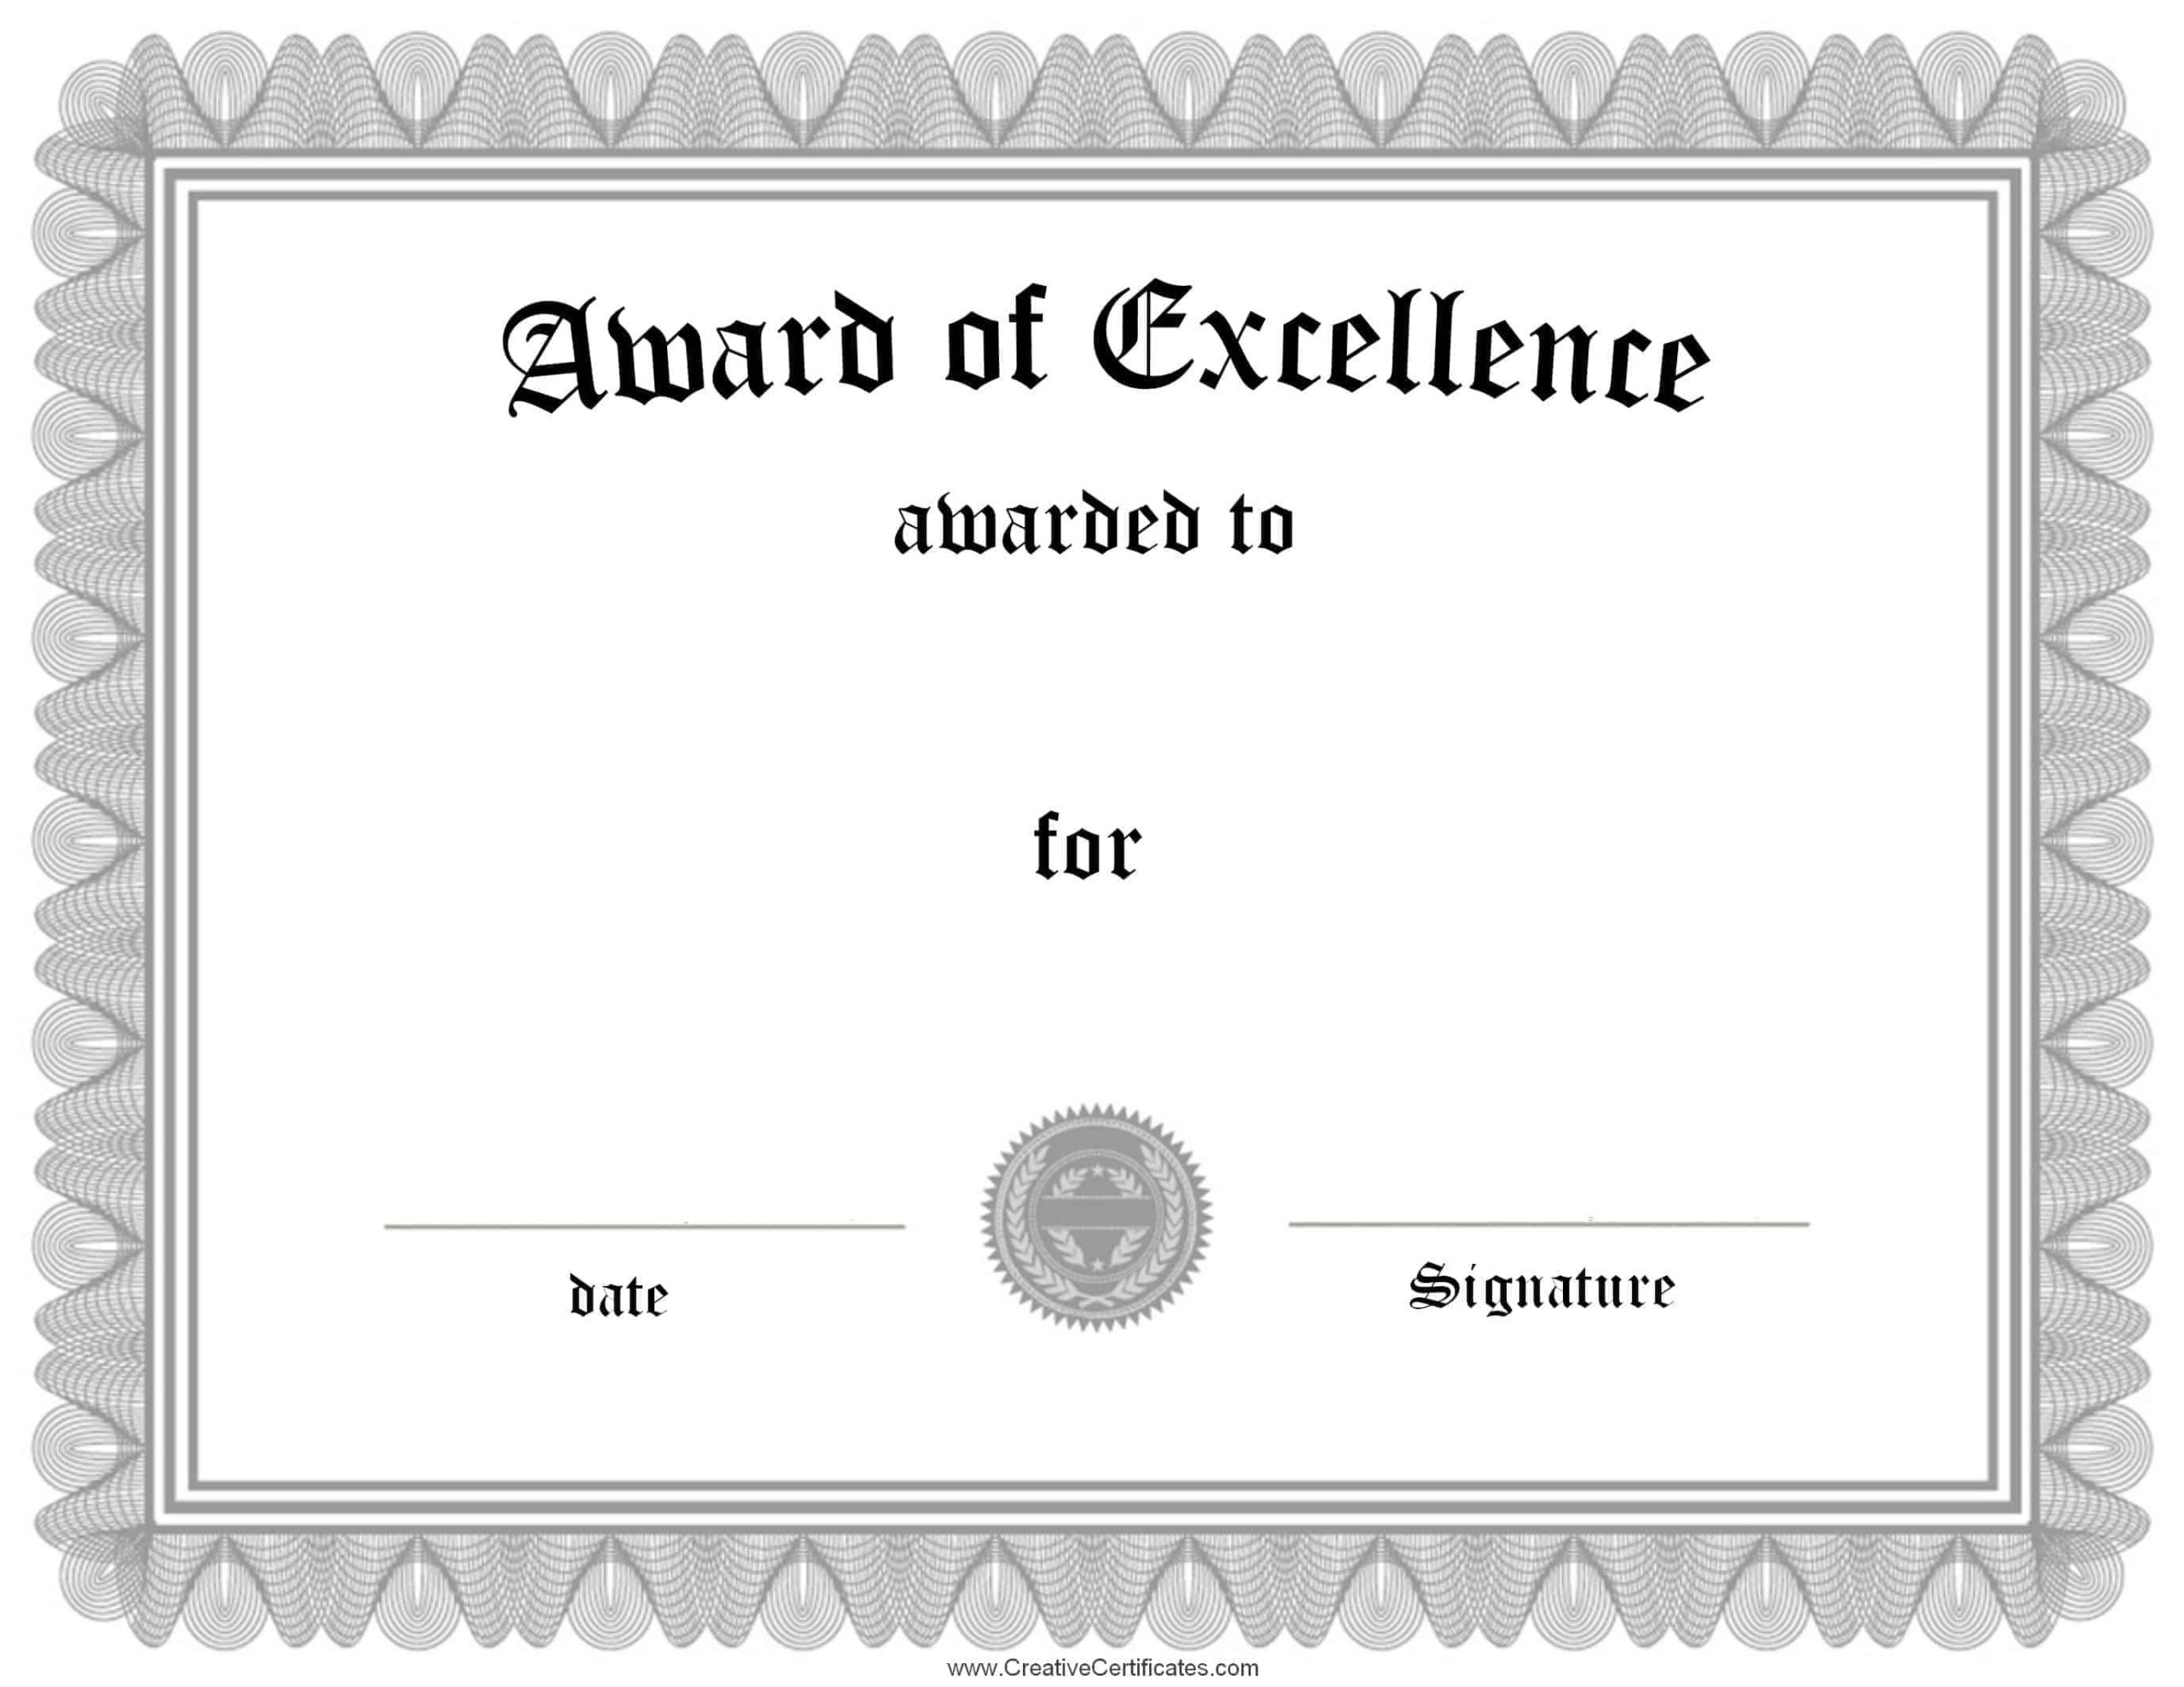 Free Customizable Certificate Of Achievement Throughout Quality Award Of Excellence Certificate Template